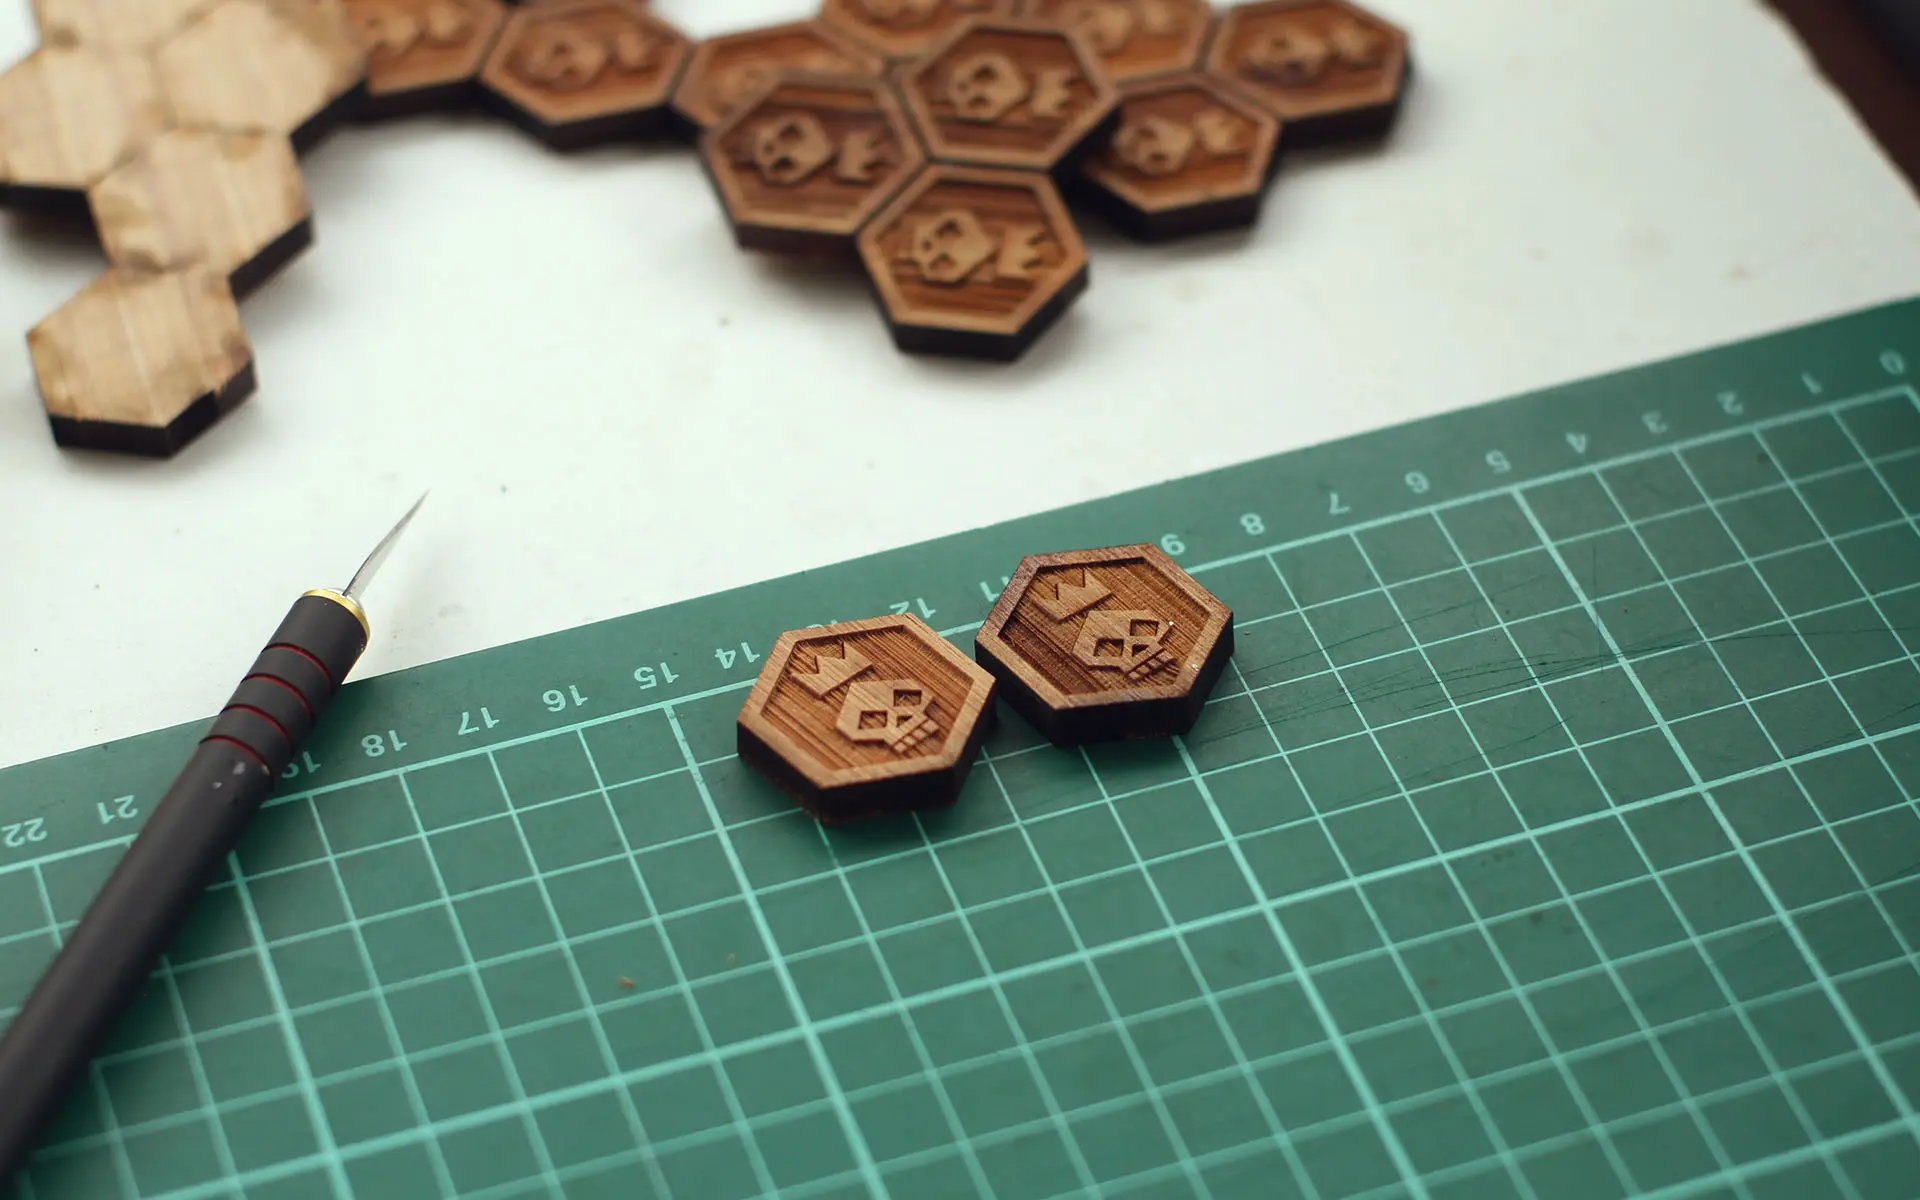 Two hexagonal pins with skulls and crowns sitting on a green cutting mat.